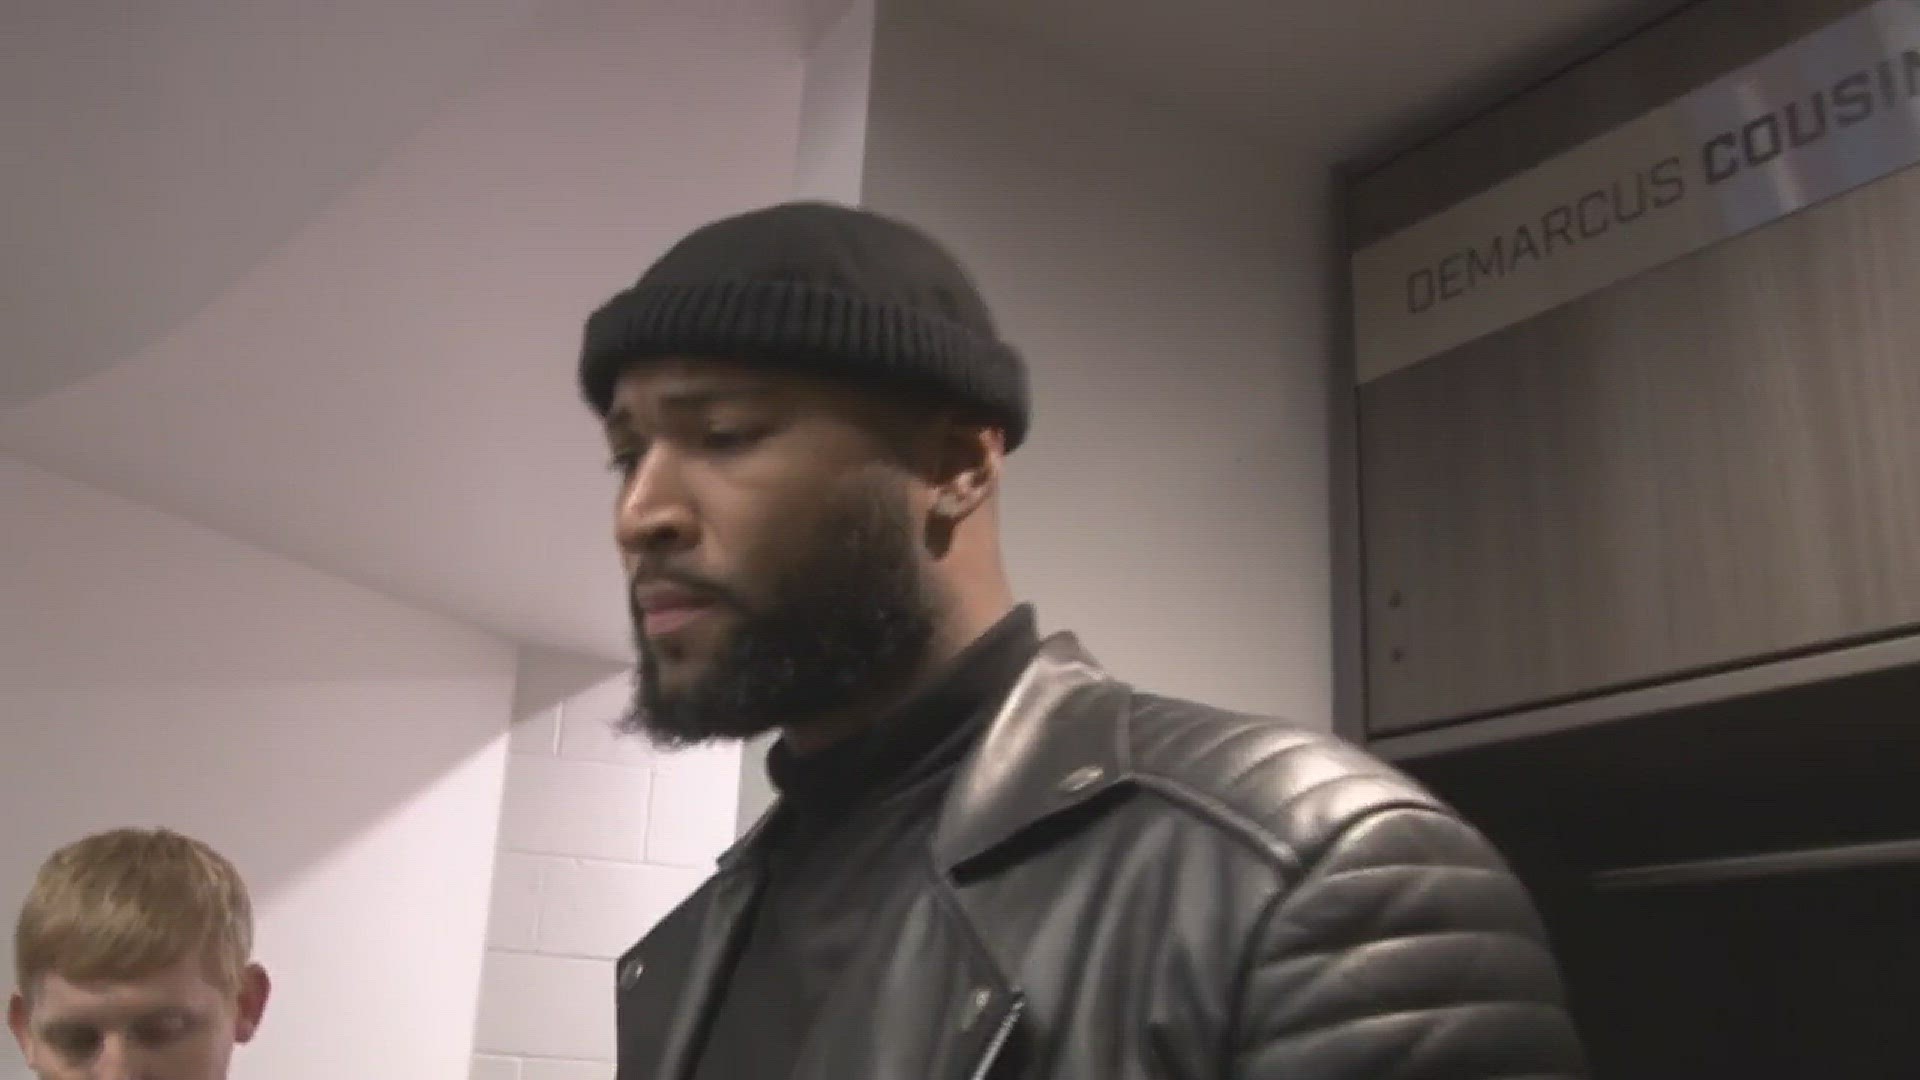 Sacramento Kings center DeMarcus Cousins talks about Sunday's loss at home to the Golden State Warriors, his recent streak of tough games and turning around the seven-game homestand.